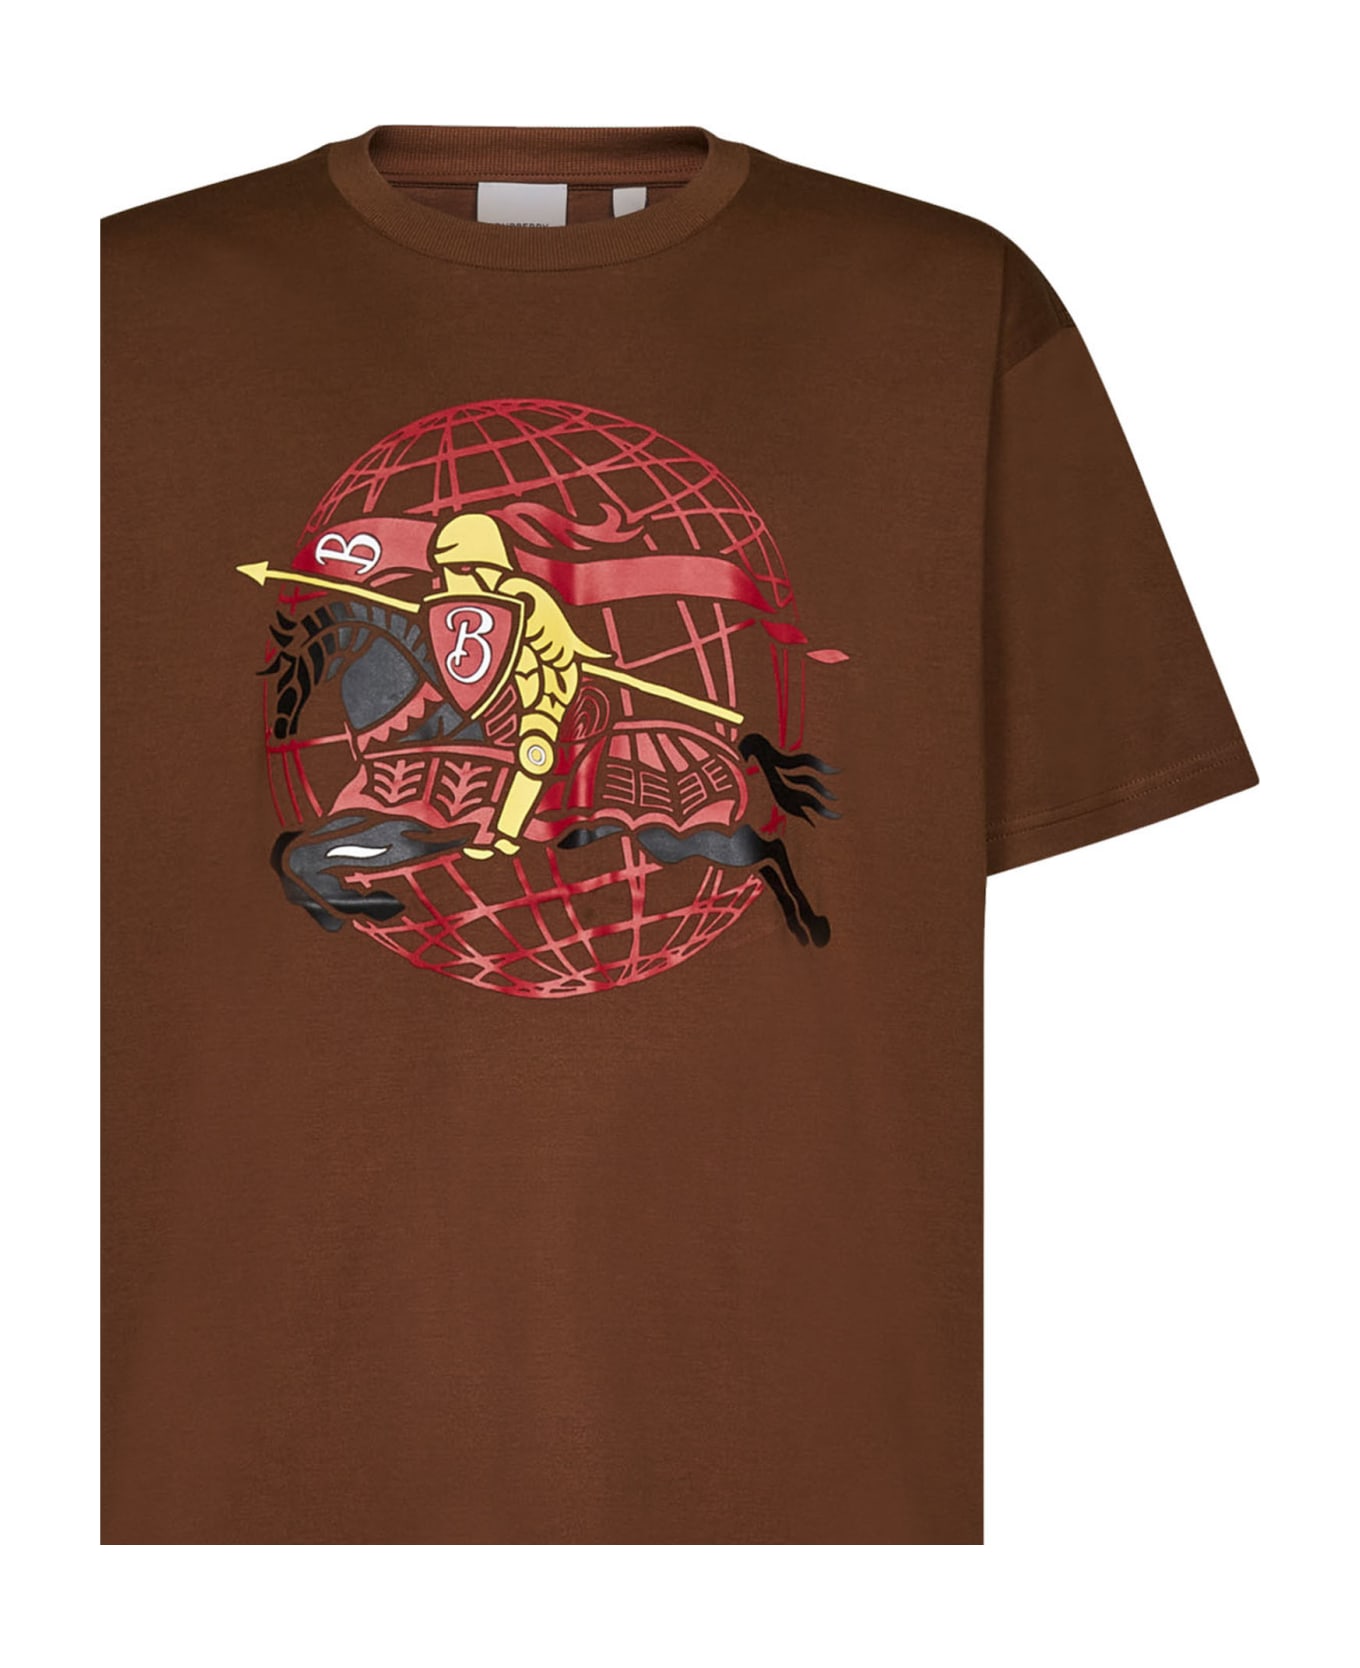 Burberry Brown Crewneck T-shirt With Graphic Print In Cotton Man - Beige シャツ